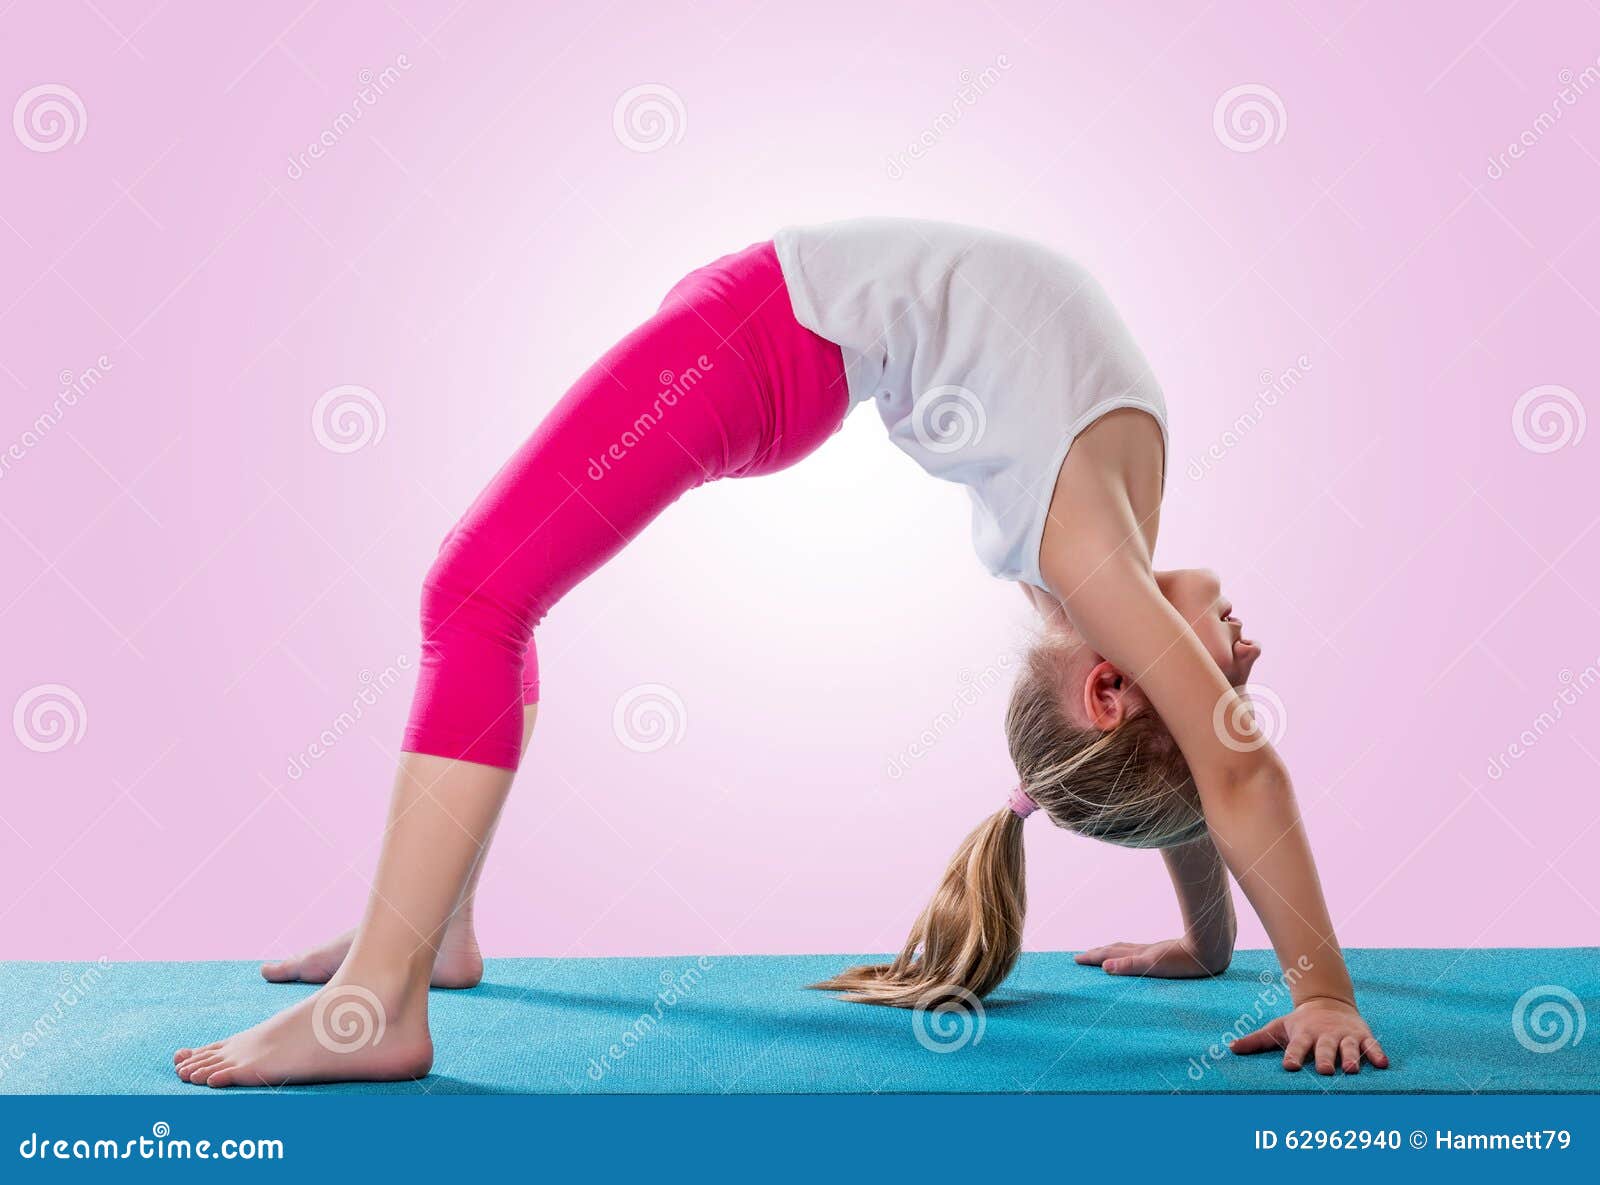 middle aged woman yoga asanas. instructor shows a pose from yoga. woman  practicing yoga Stock Photo by yavdat